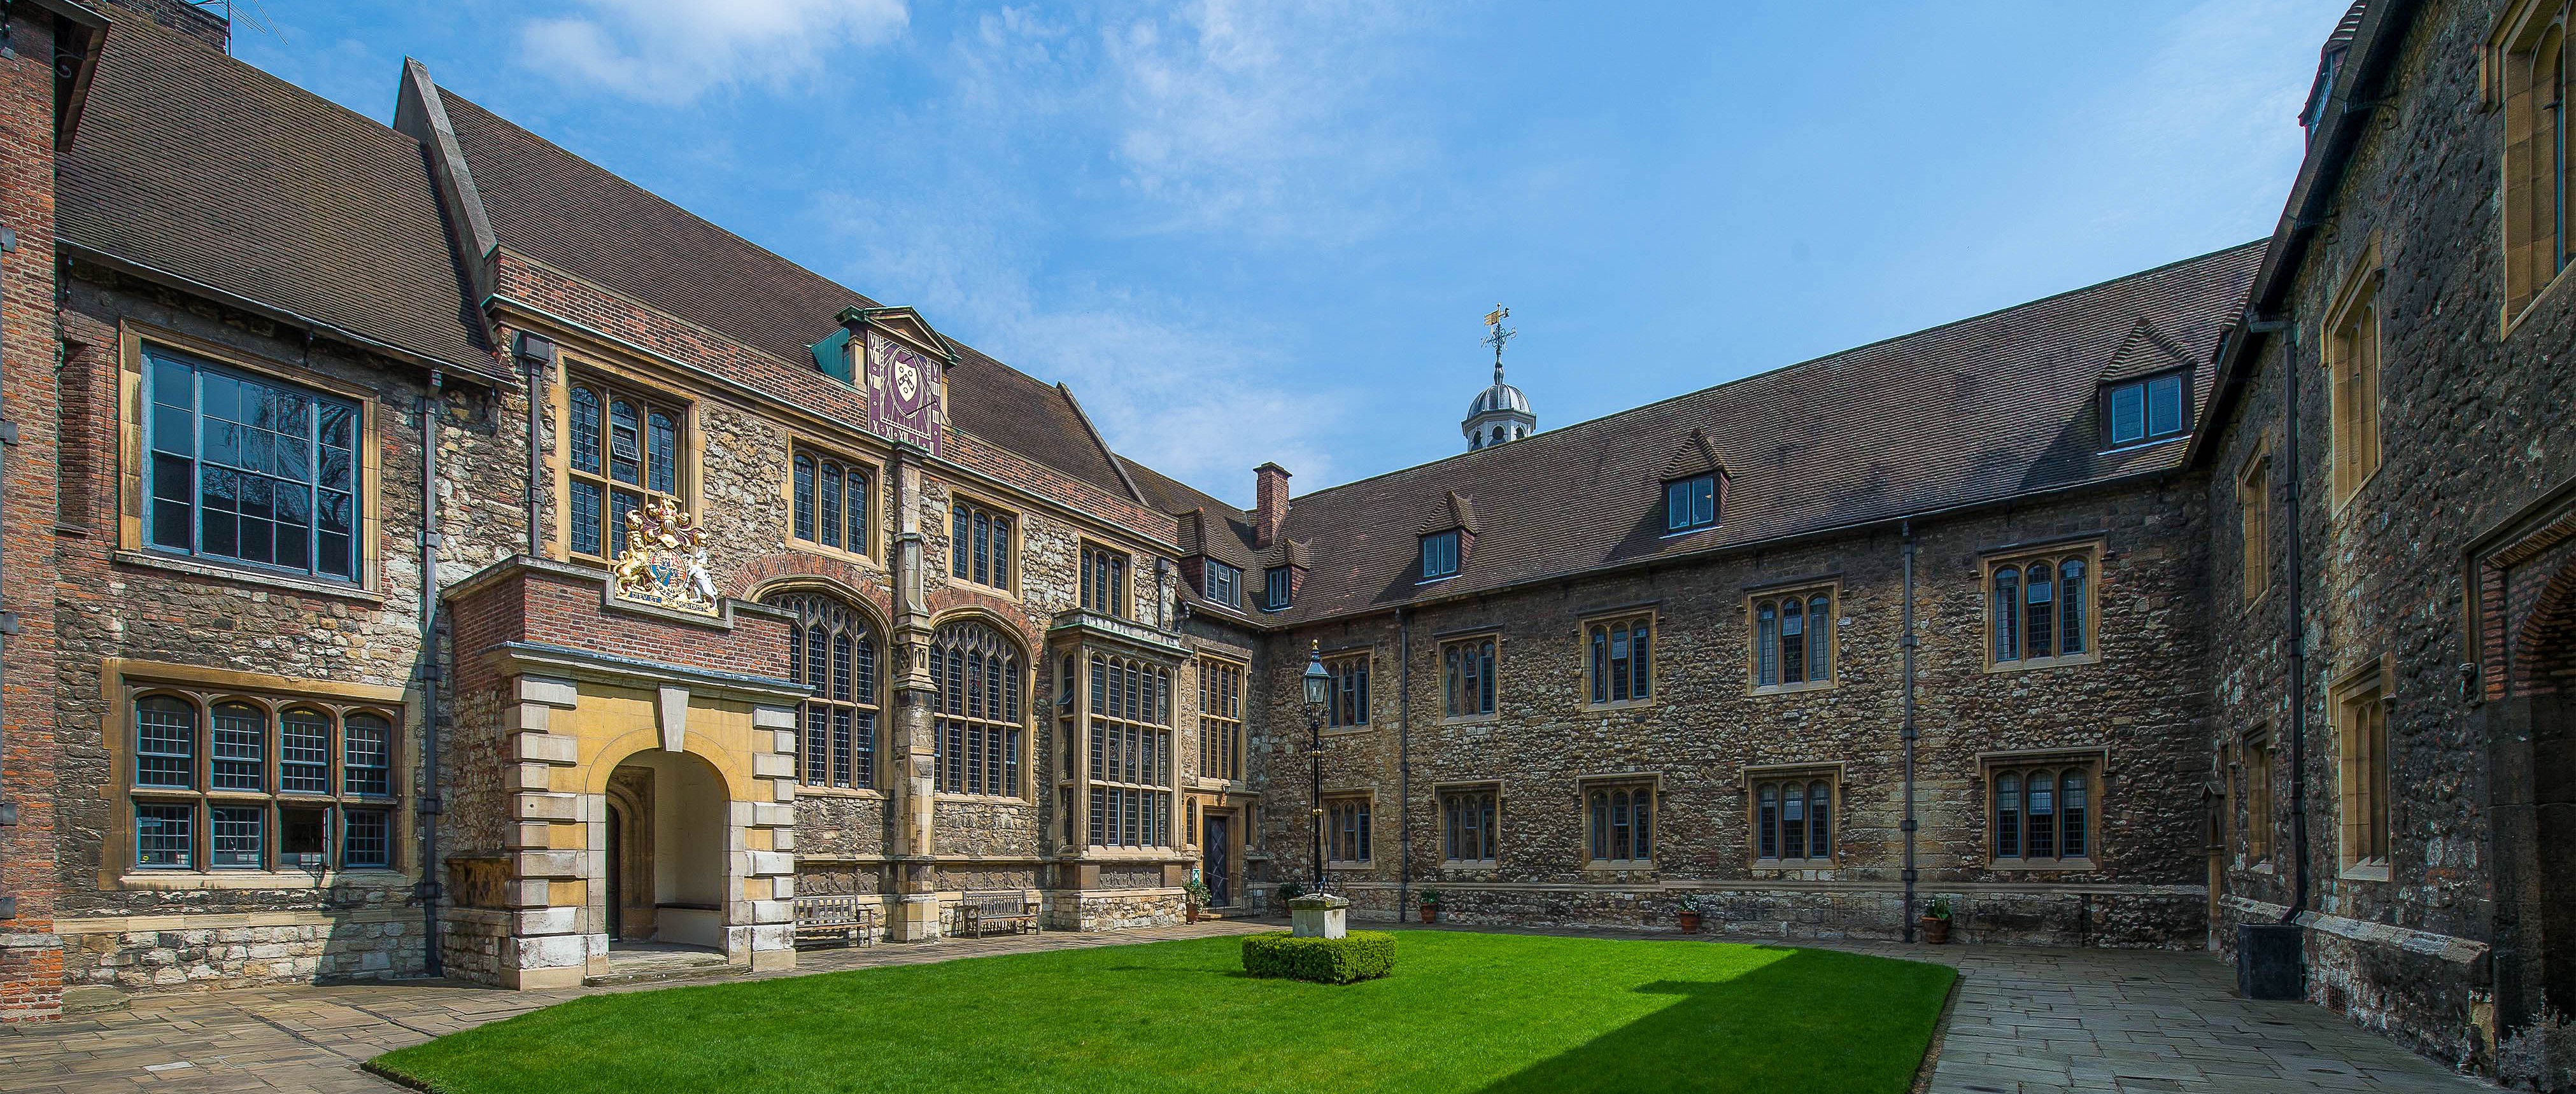 The Charterhouse Great Hall, designed in the sixteenth century by Sir Edward North. Image courtesy of the The Charterhouse.